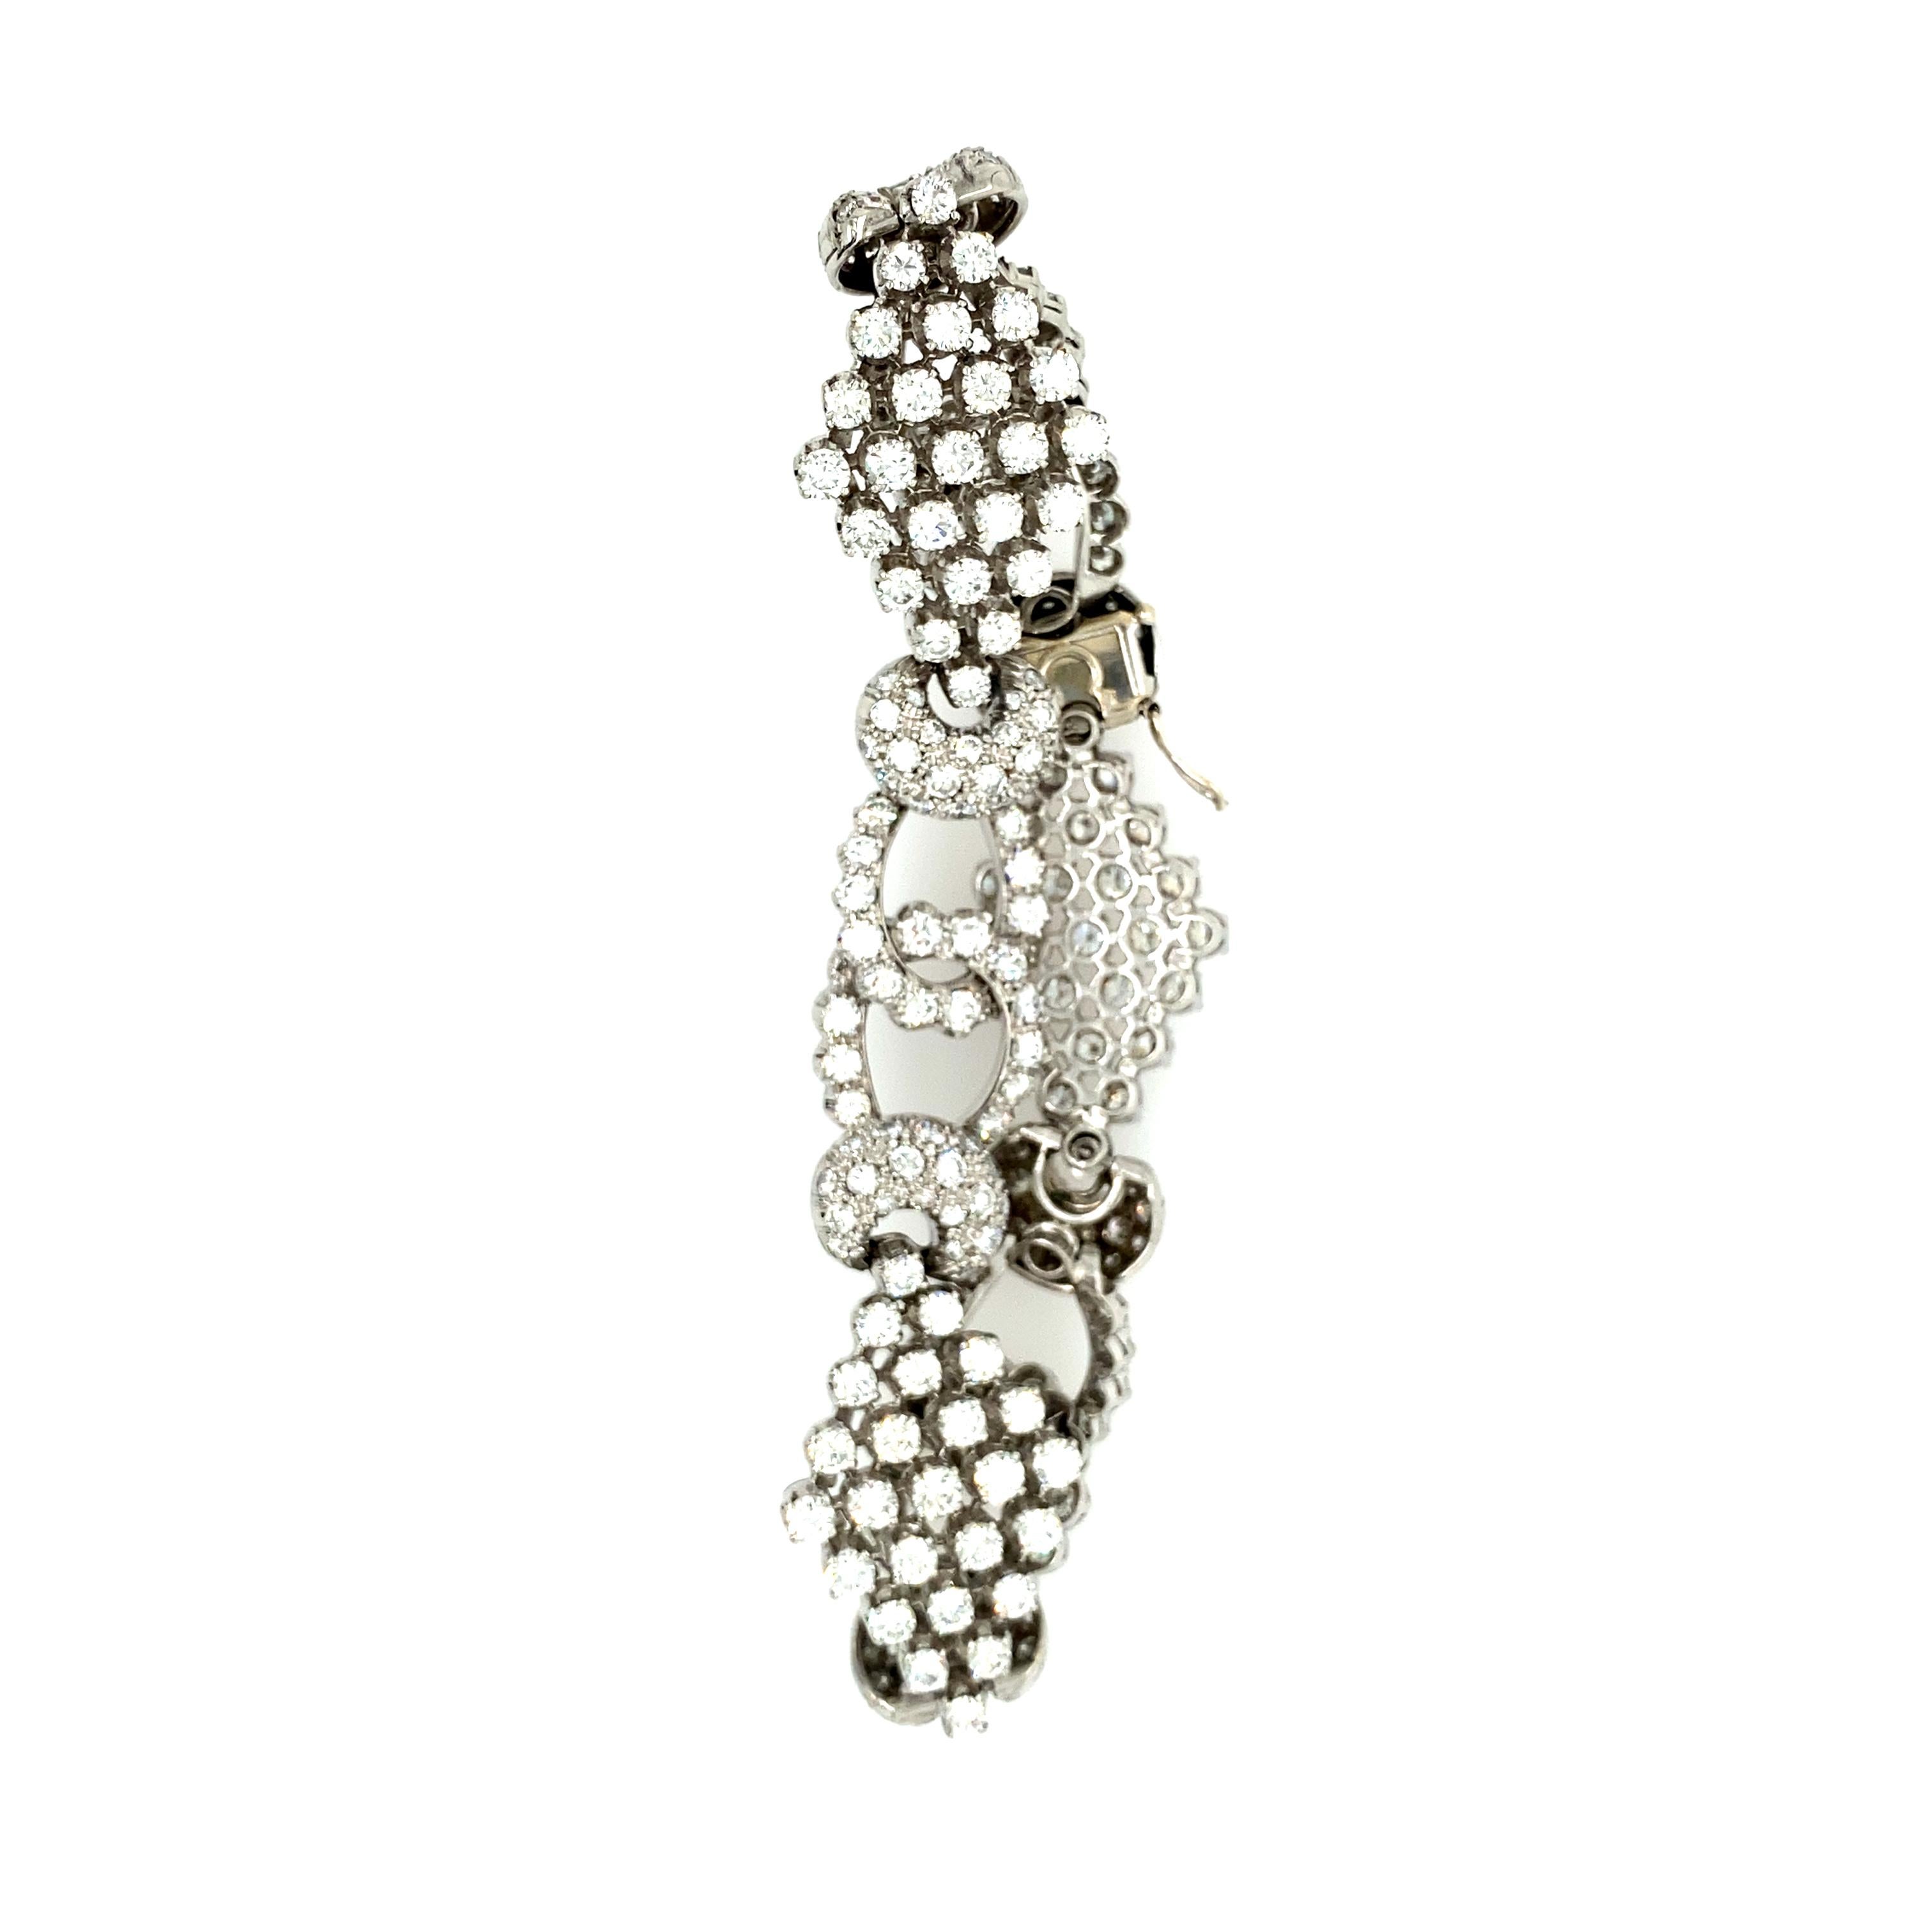 Fabulous Estate Diamond Bracelet with approximately 12.00cts of G-H VS round brilliant cut diamonds. The bracelet tests positive for 18k white gold, is 7.25'' long and circa. 1950-1960.